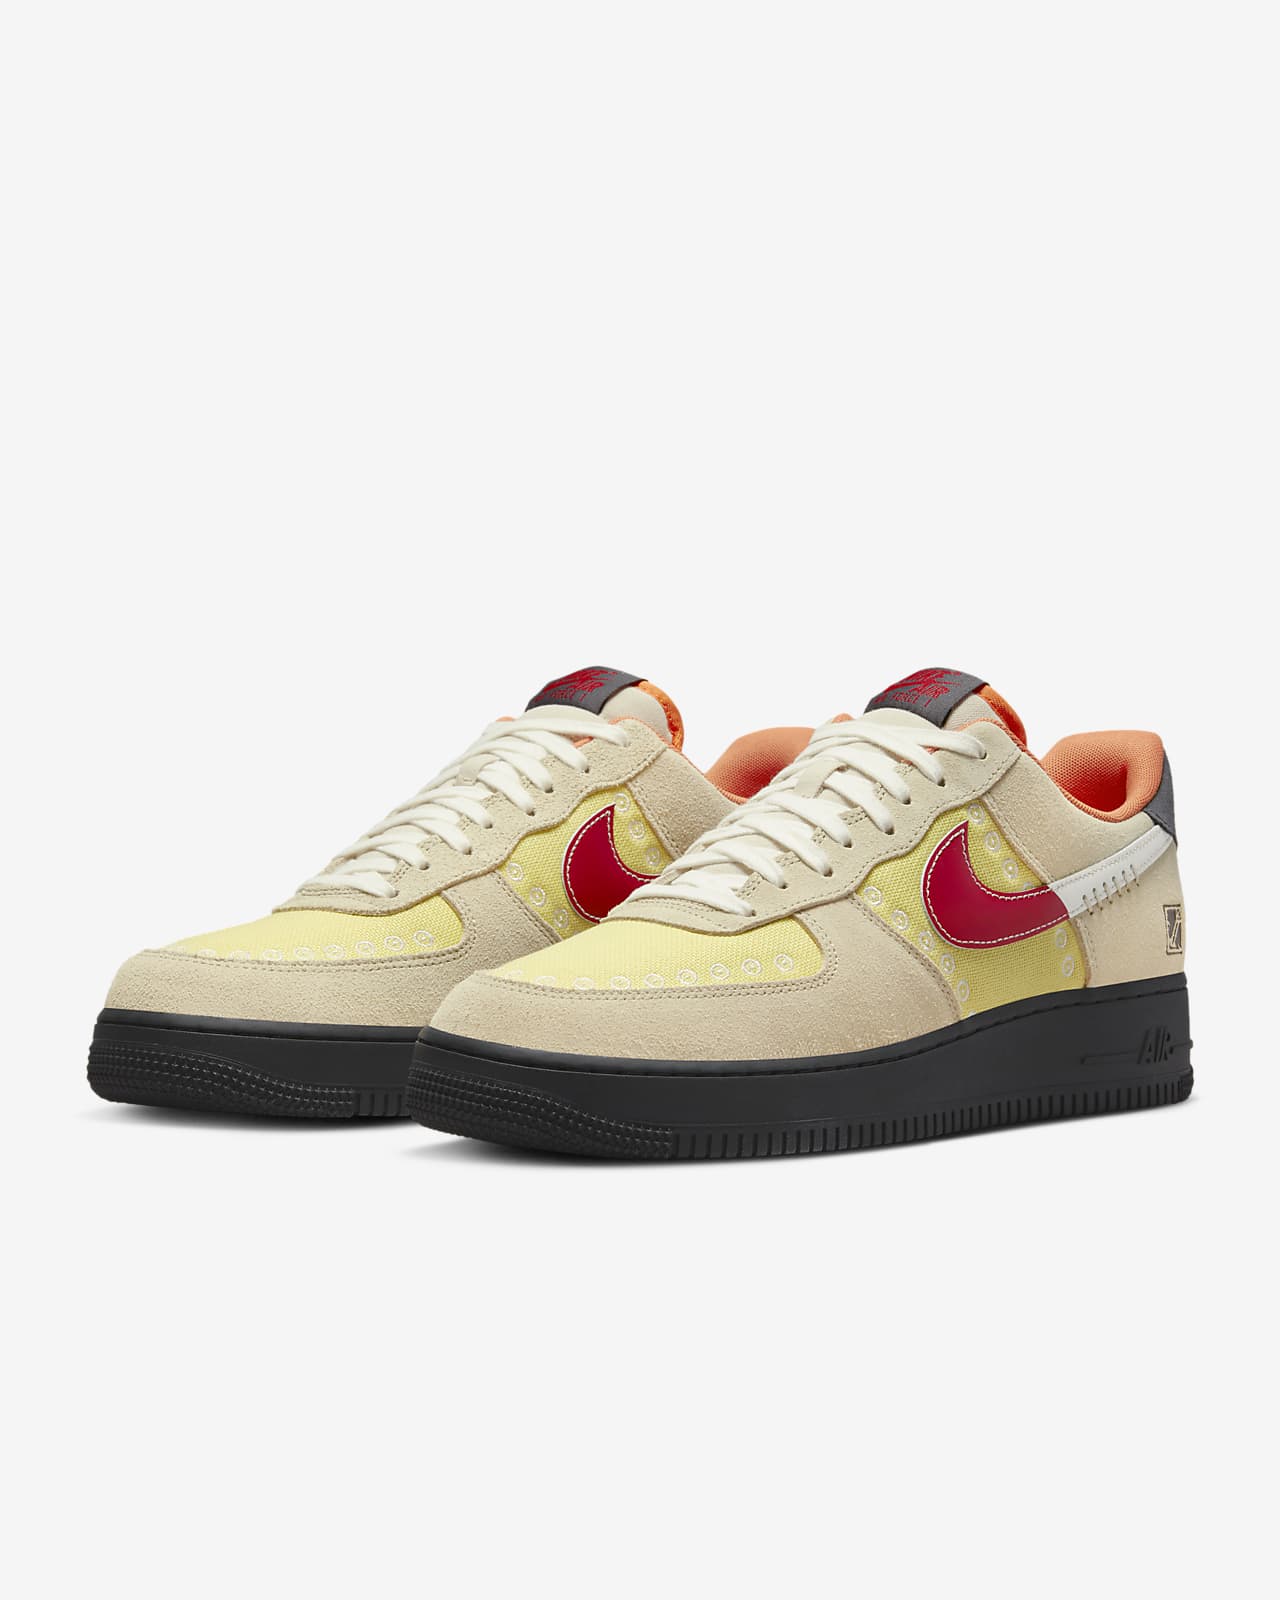 Nike Air Force 1 '07 Red - Size 7.5 Men